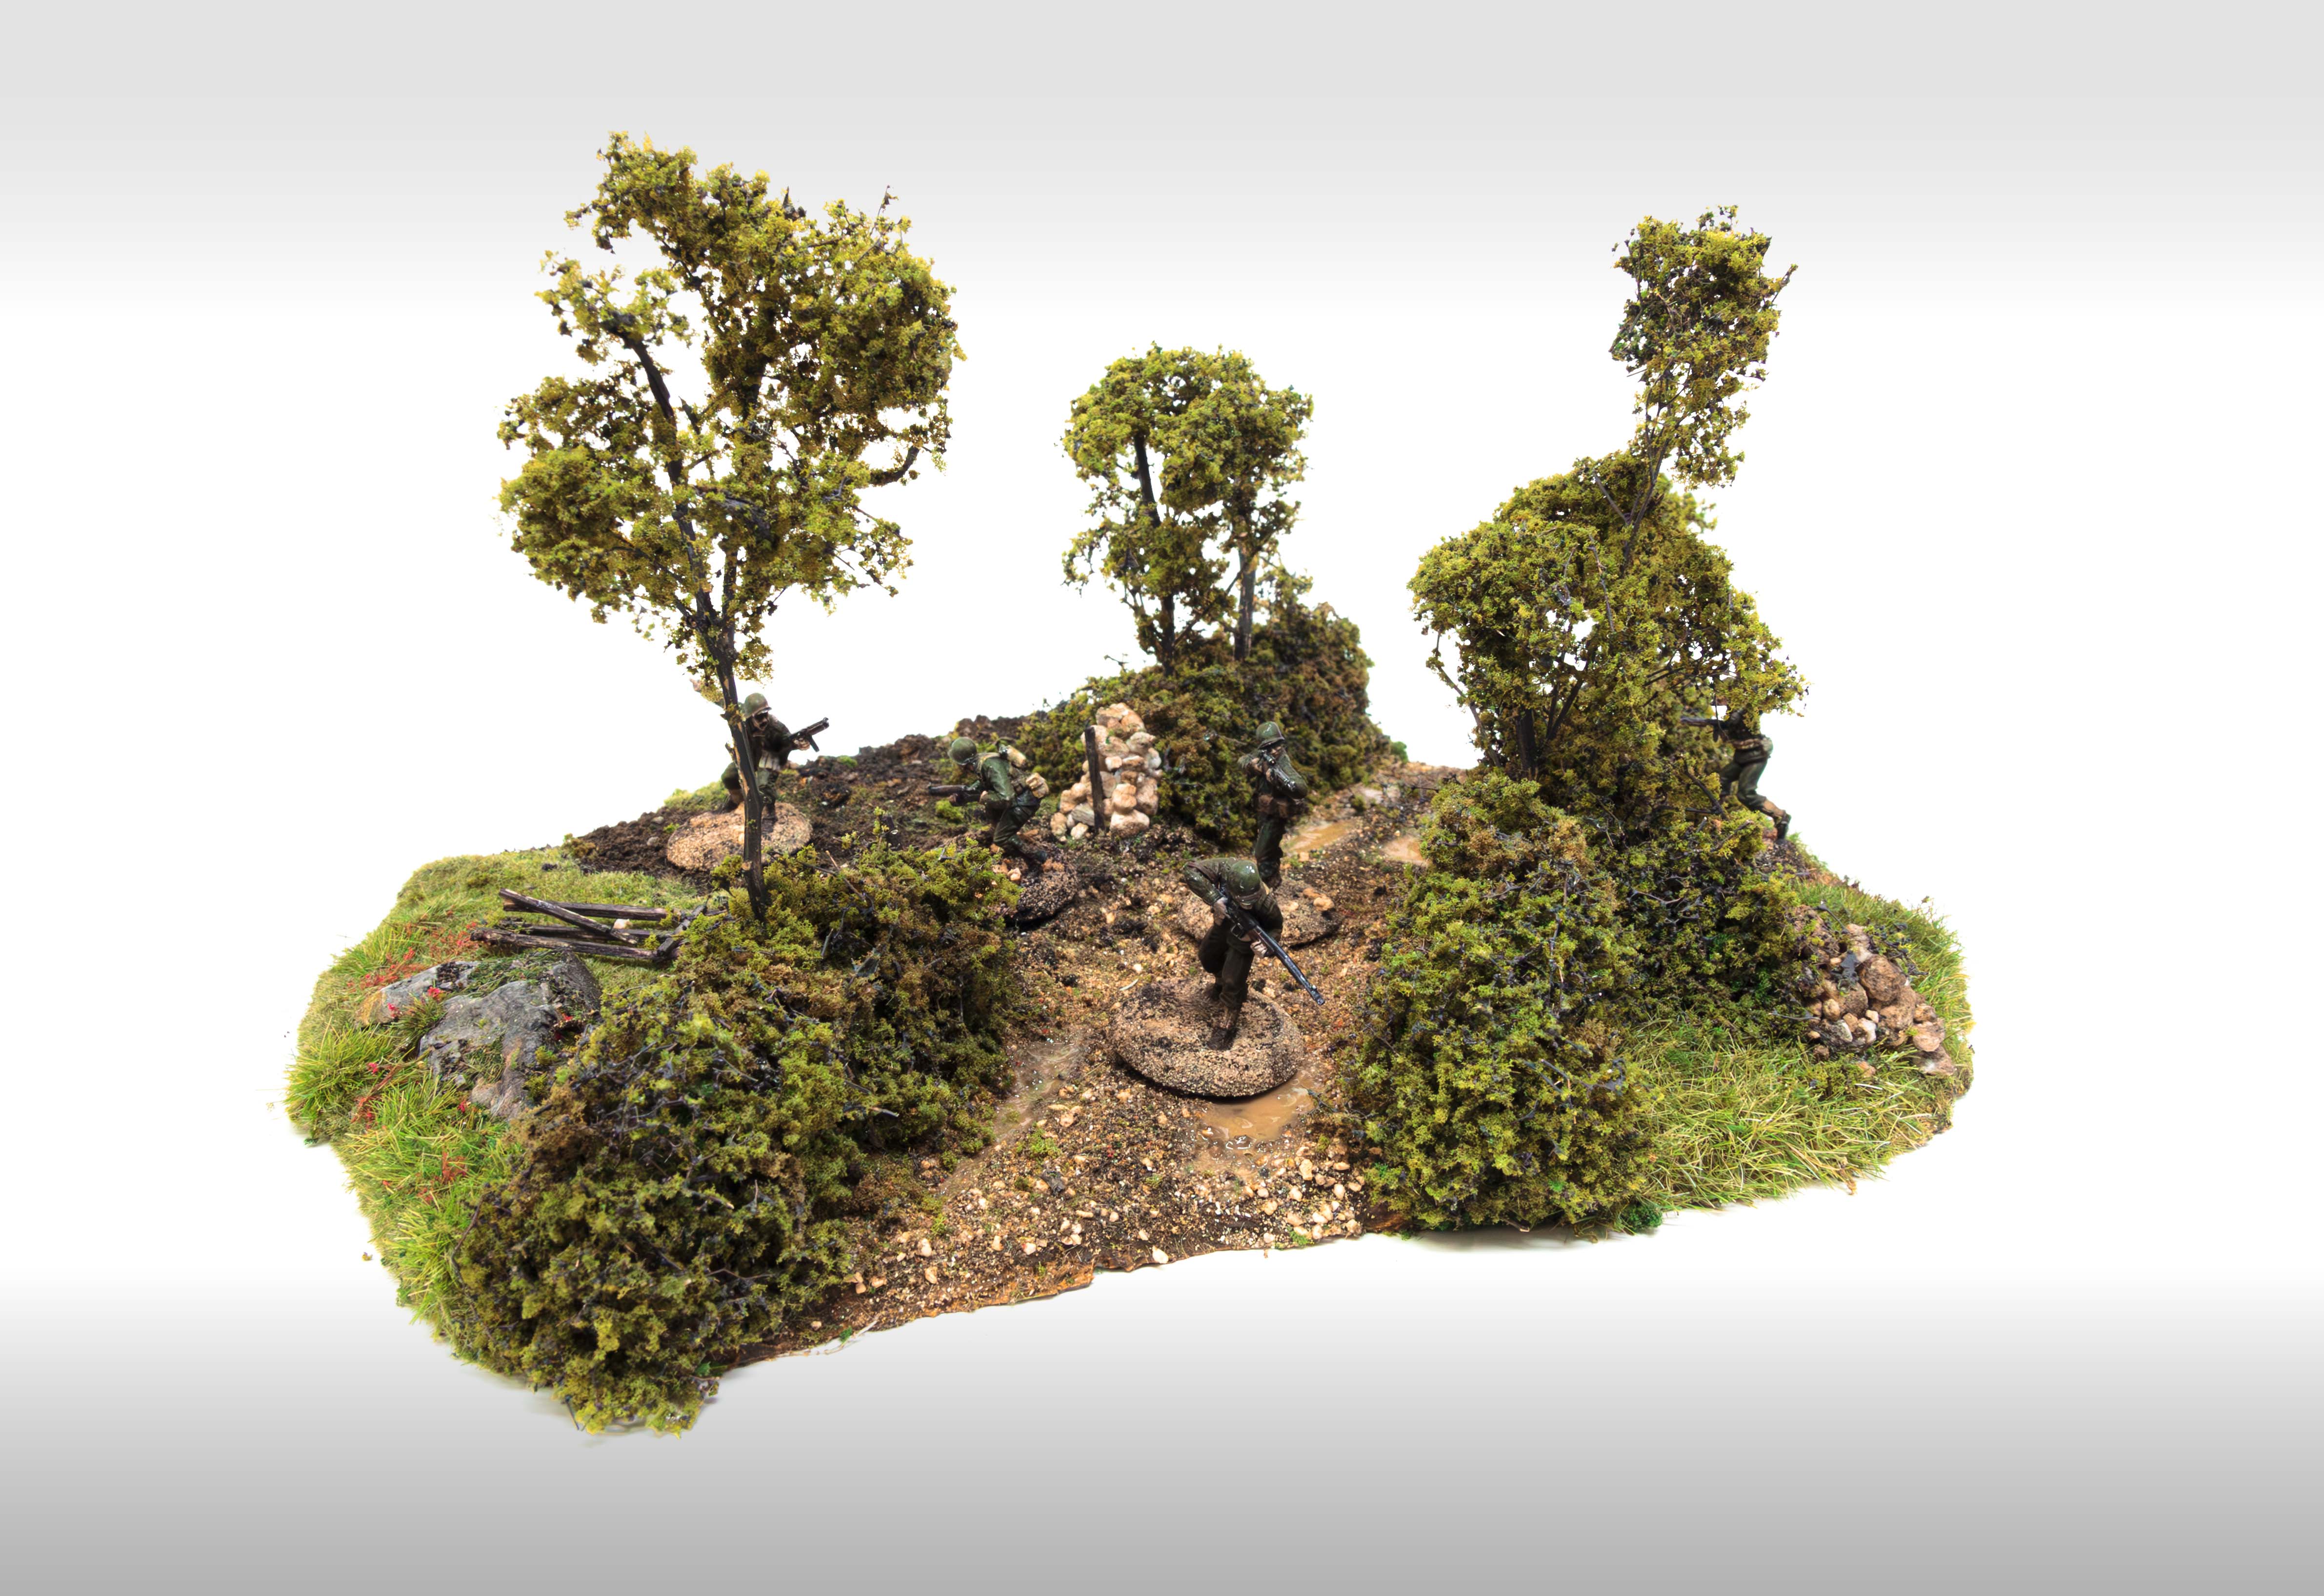 Brambles - Spring -  Spring Brambles are ideal for environments with plenty of moisture on your miniature base or gaming board